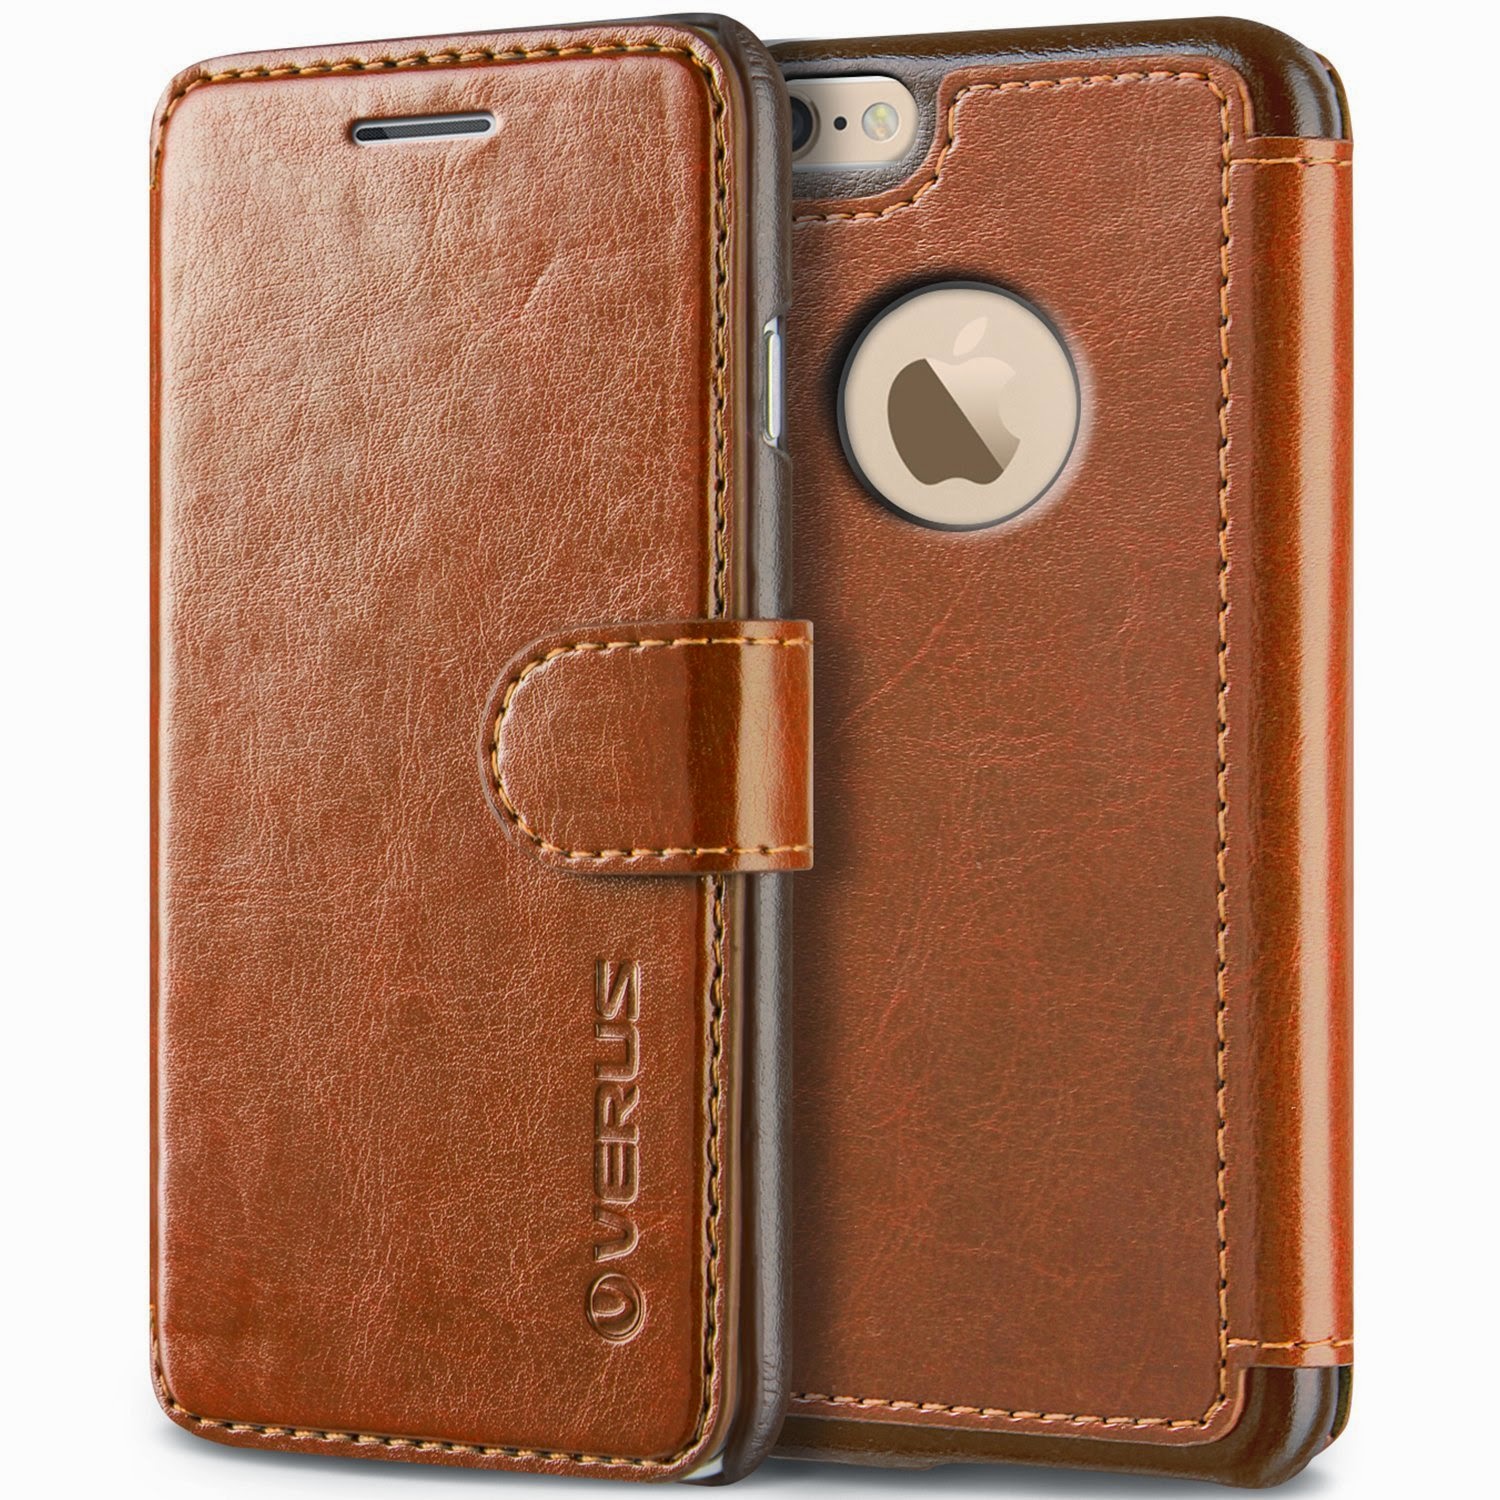 Leather Case for Apple iPhone 6